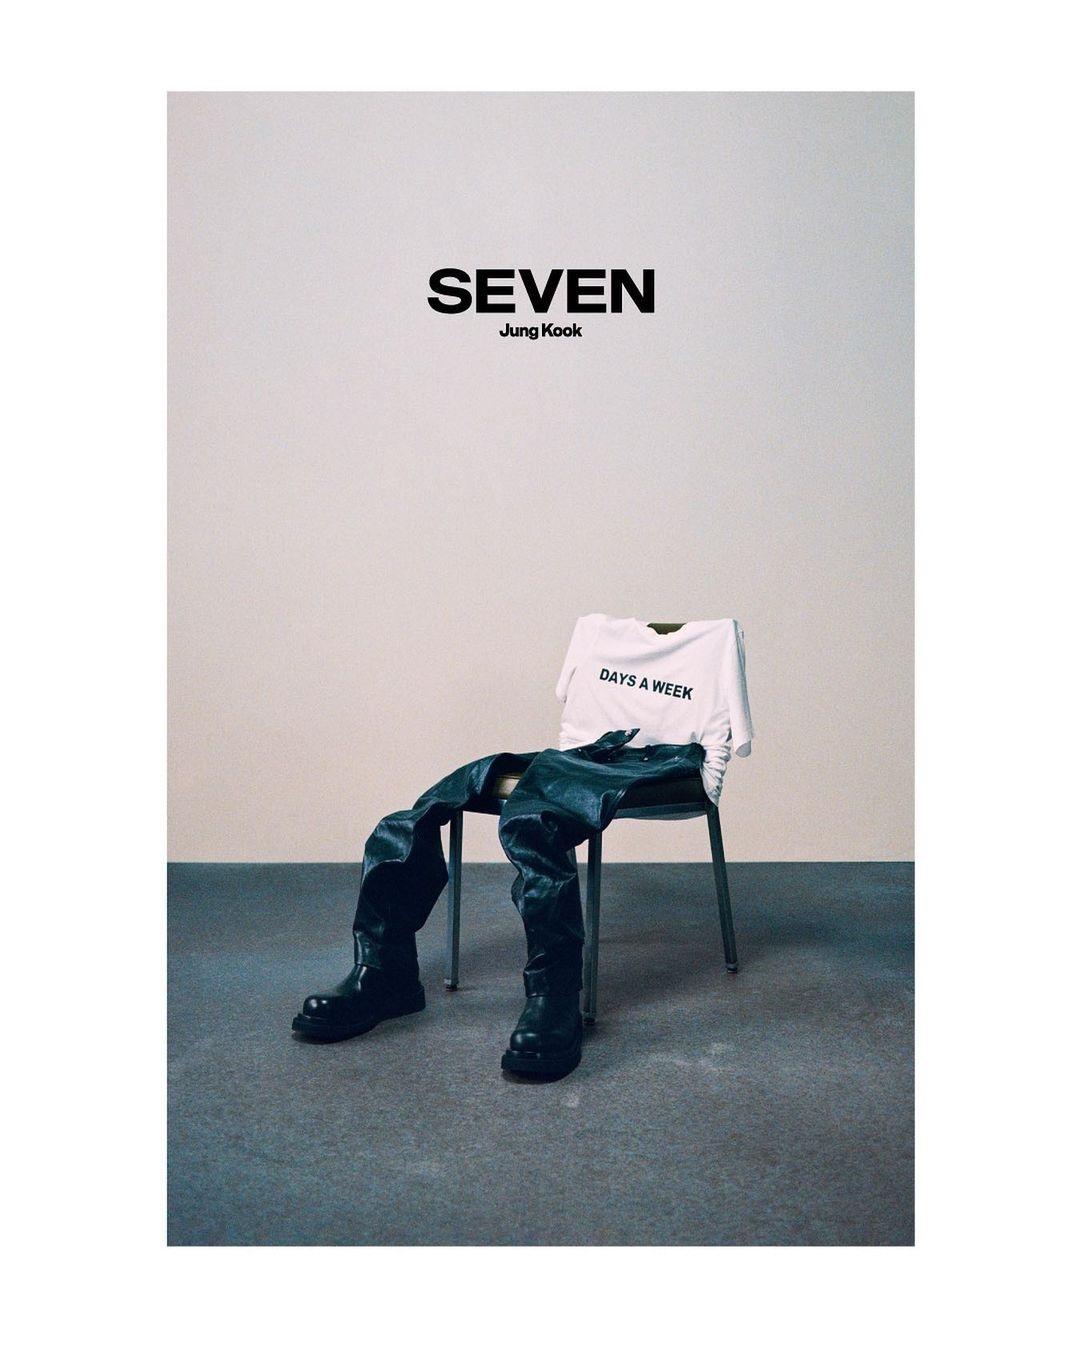 Are you excited for 'Seven'?